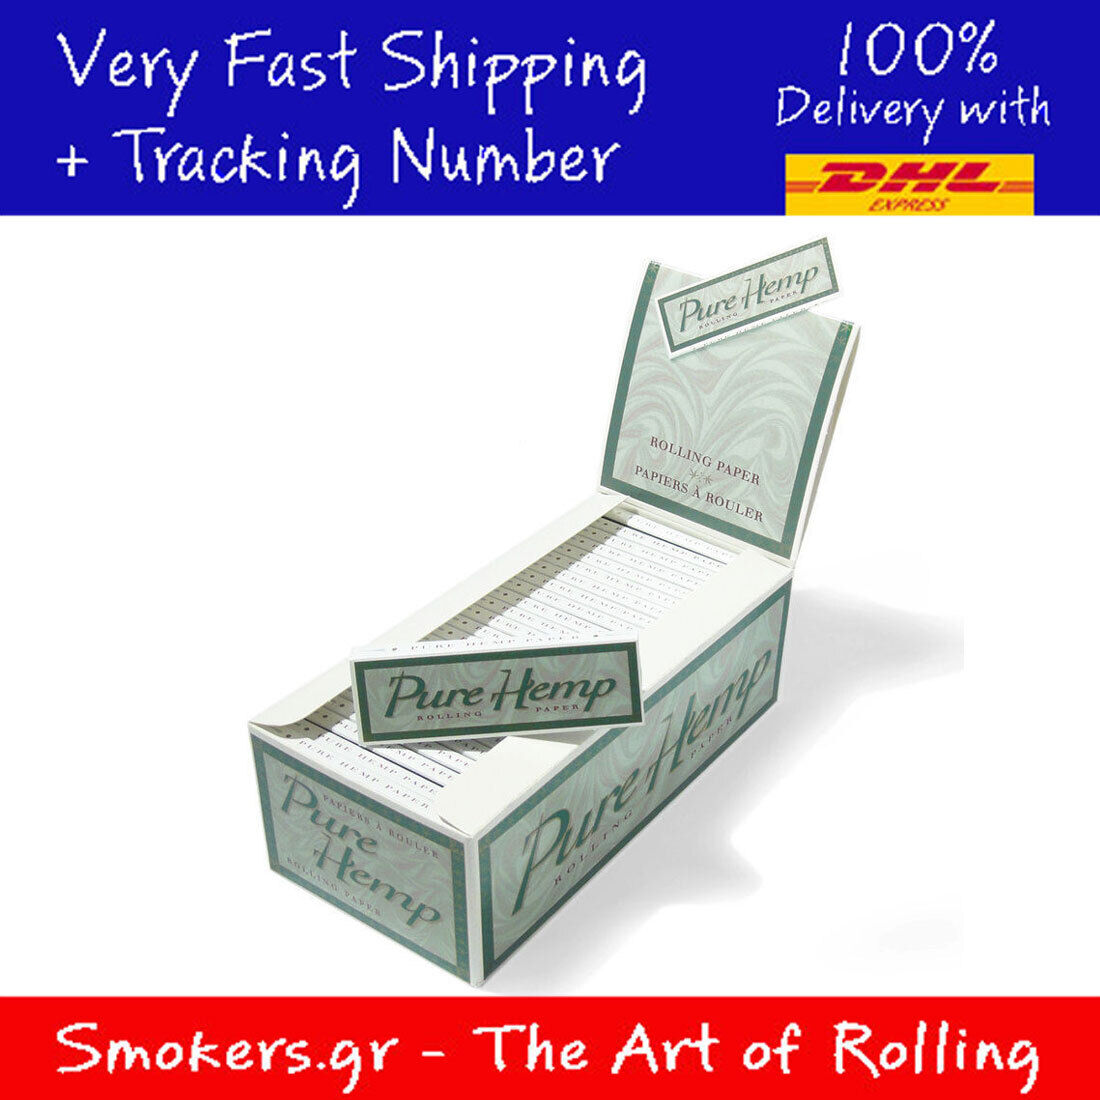 1x Box Pure Hemp Cigarette Rolling Papers (Full Box 50 booklets)